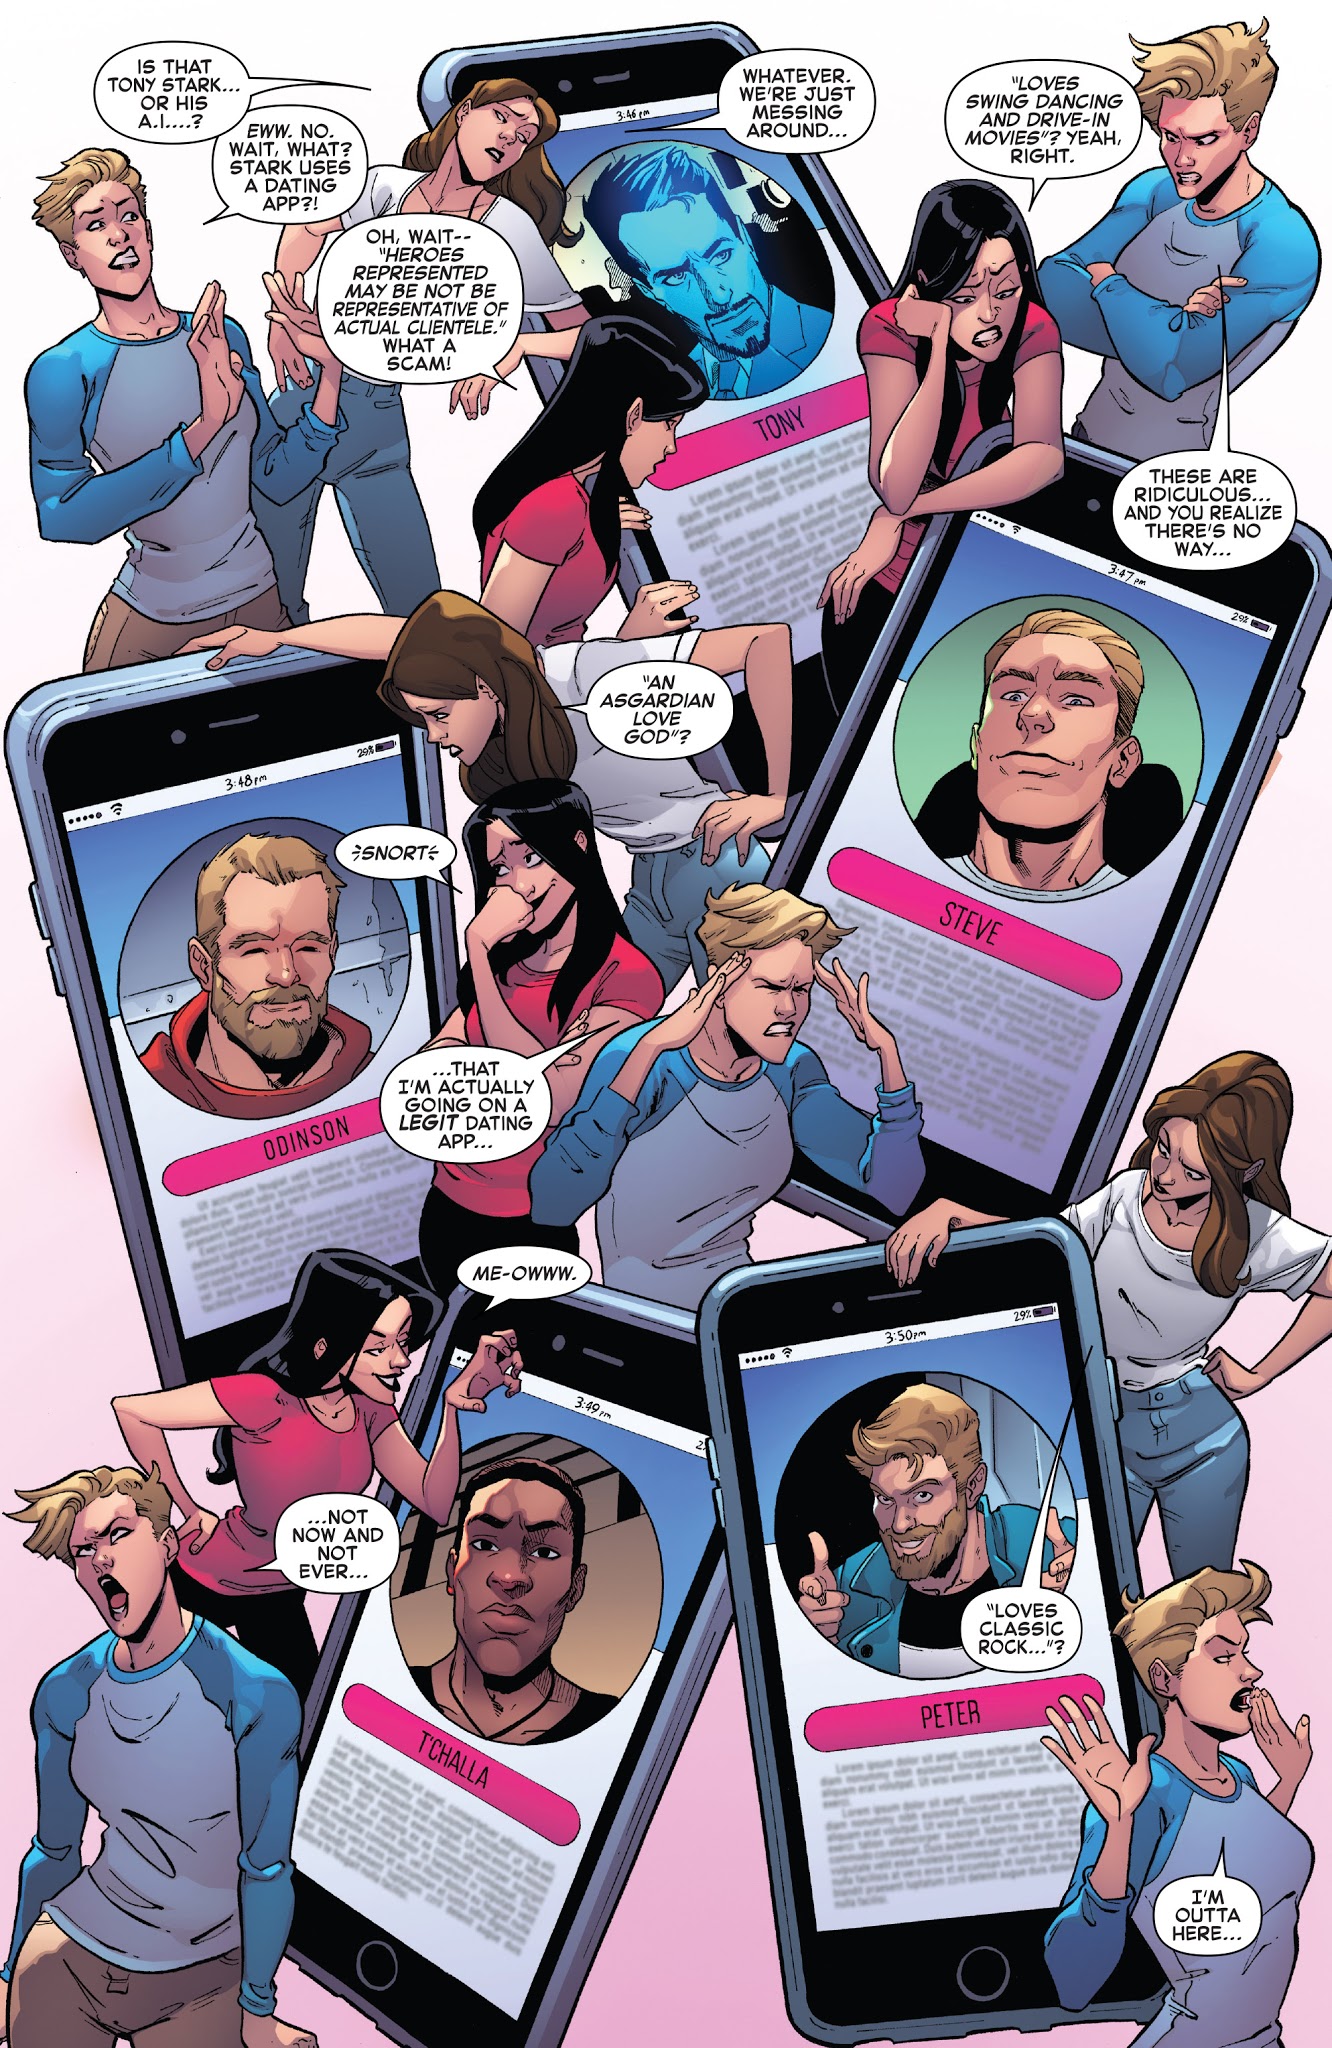 Marvel’s Superheroes Are On Hookup Apps And Hate It Just Like Everyone Else